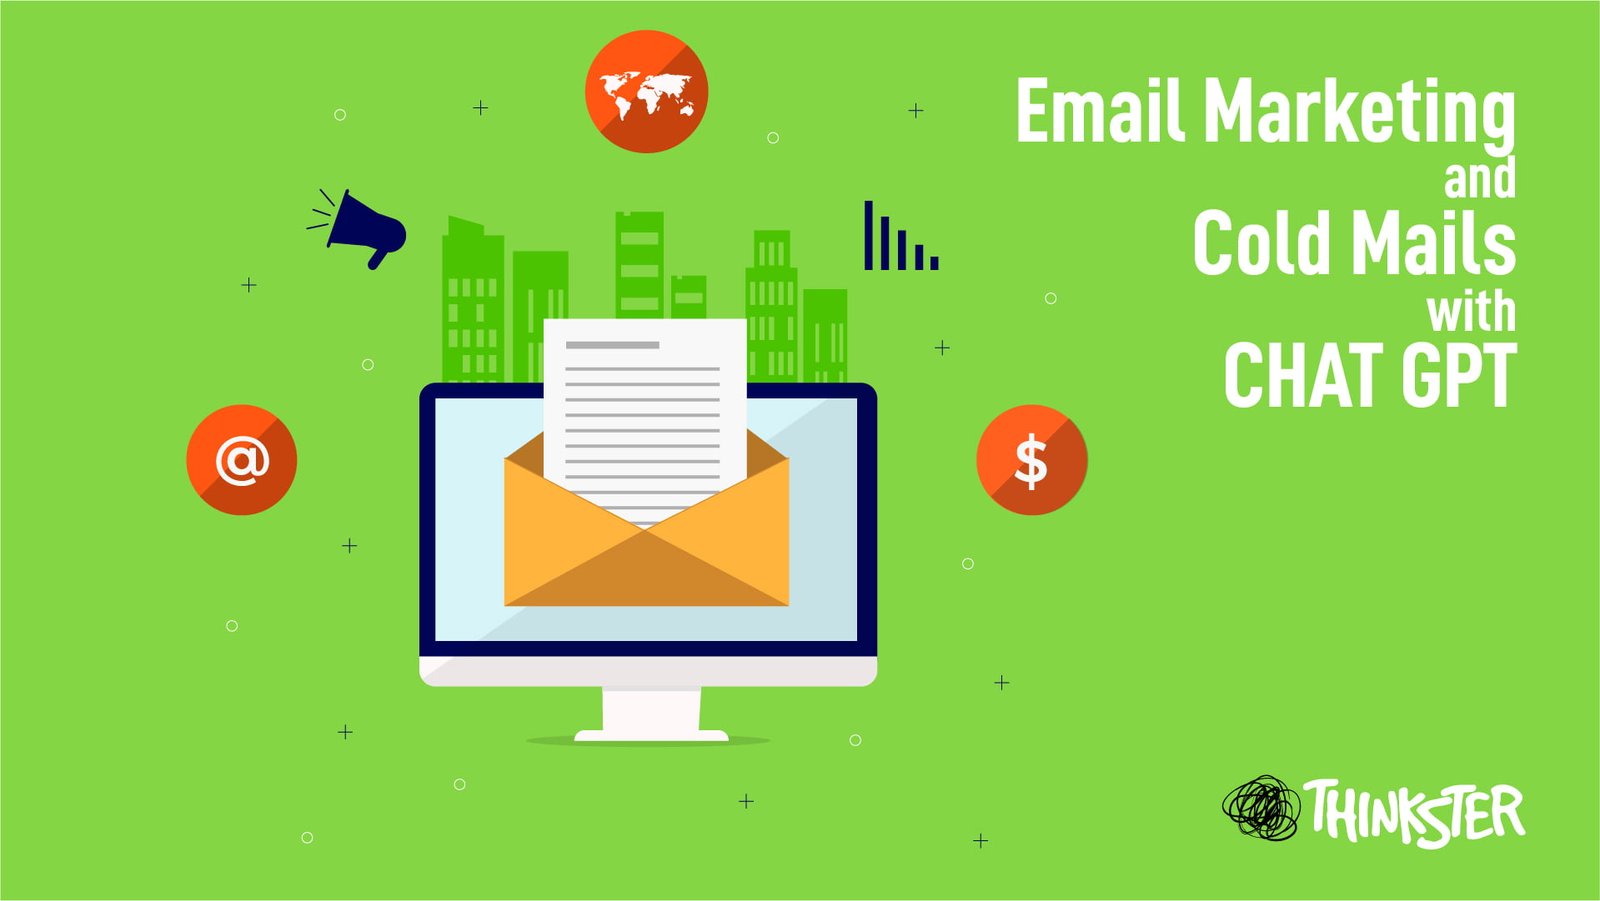 Email marketing and cold mails with chat gpt